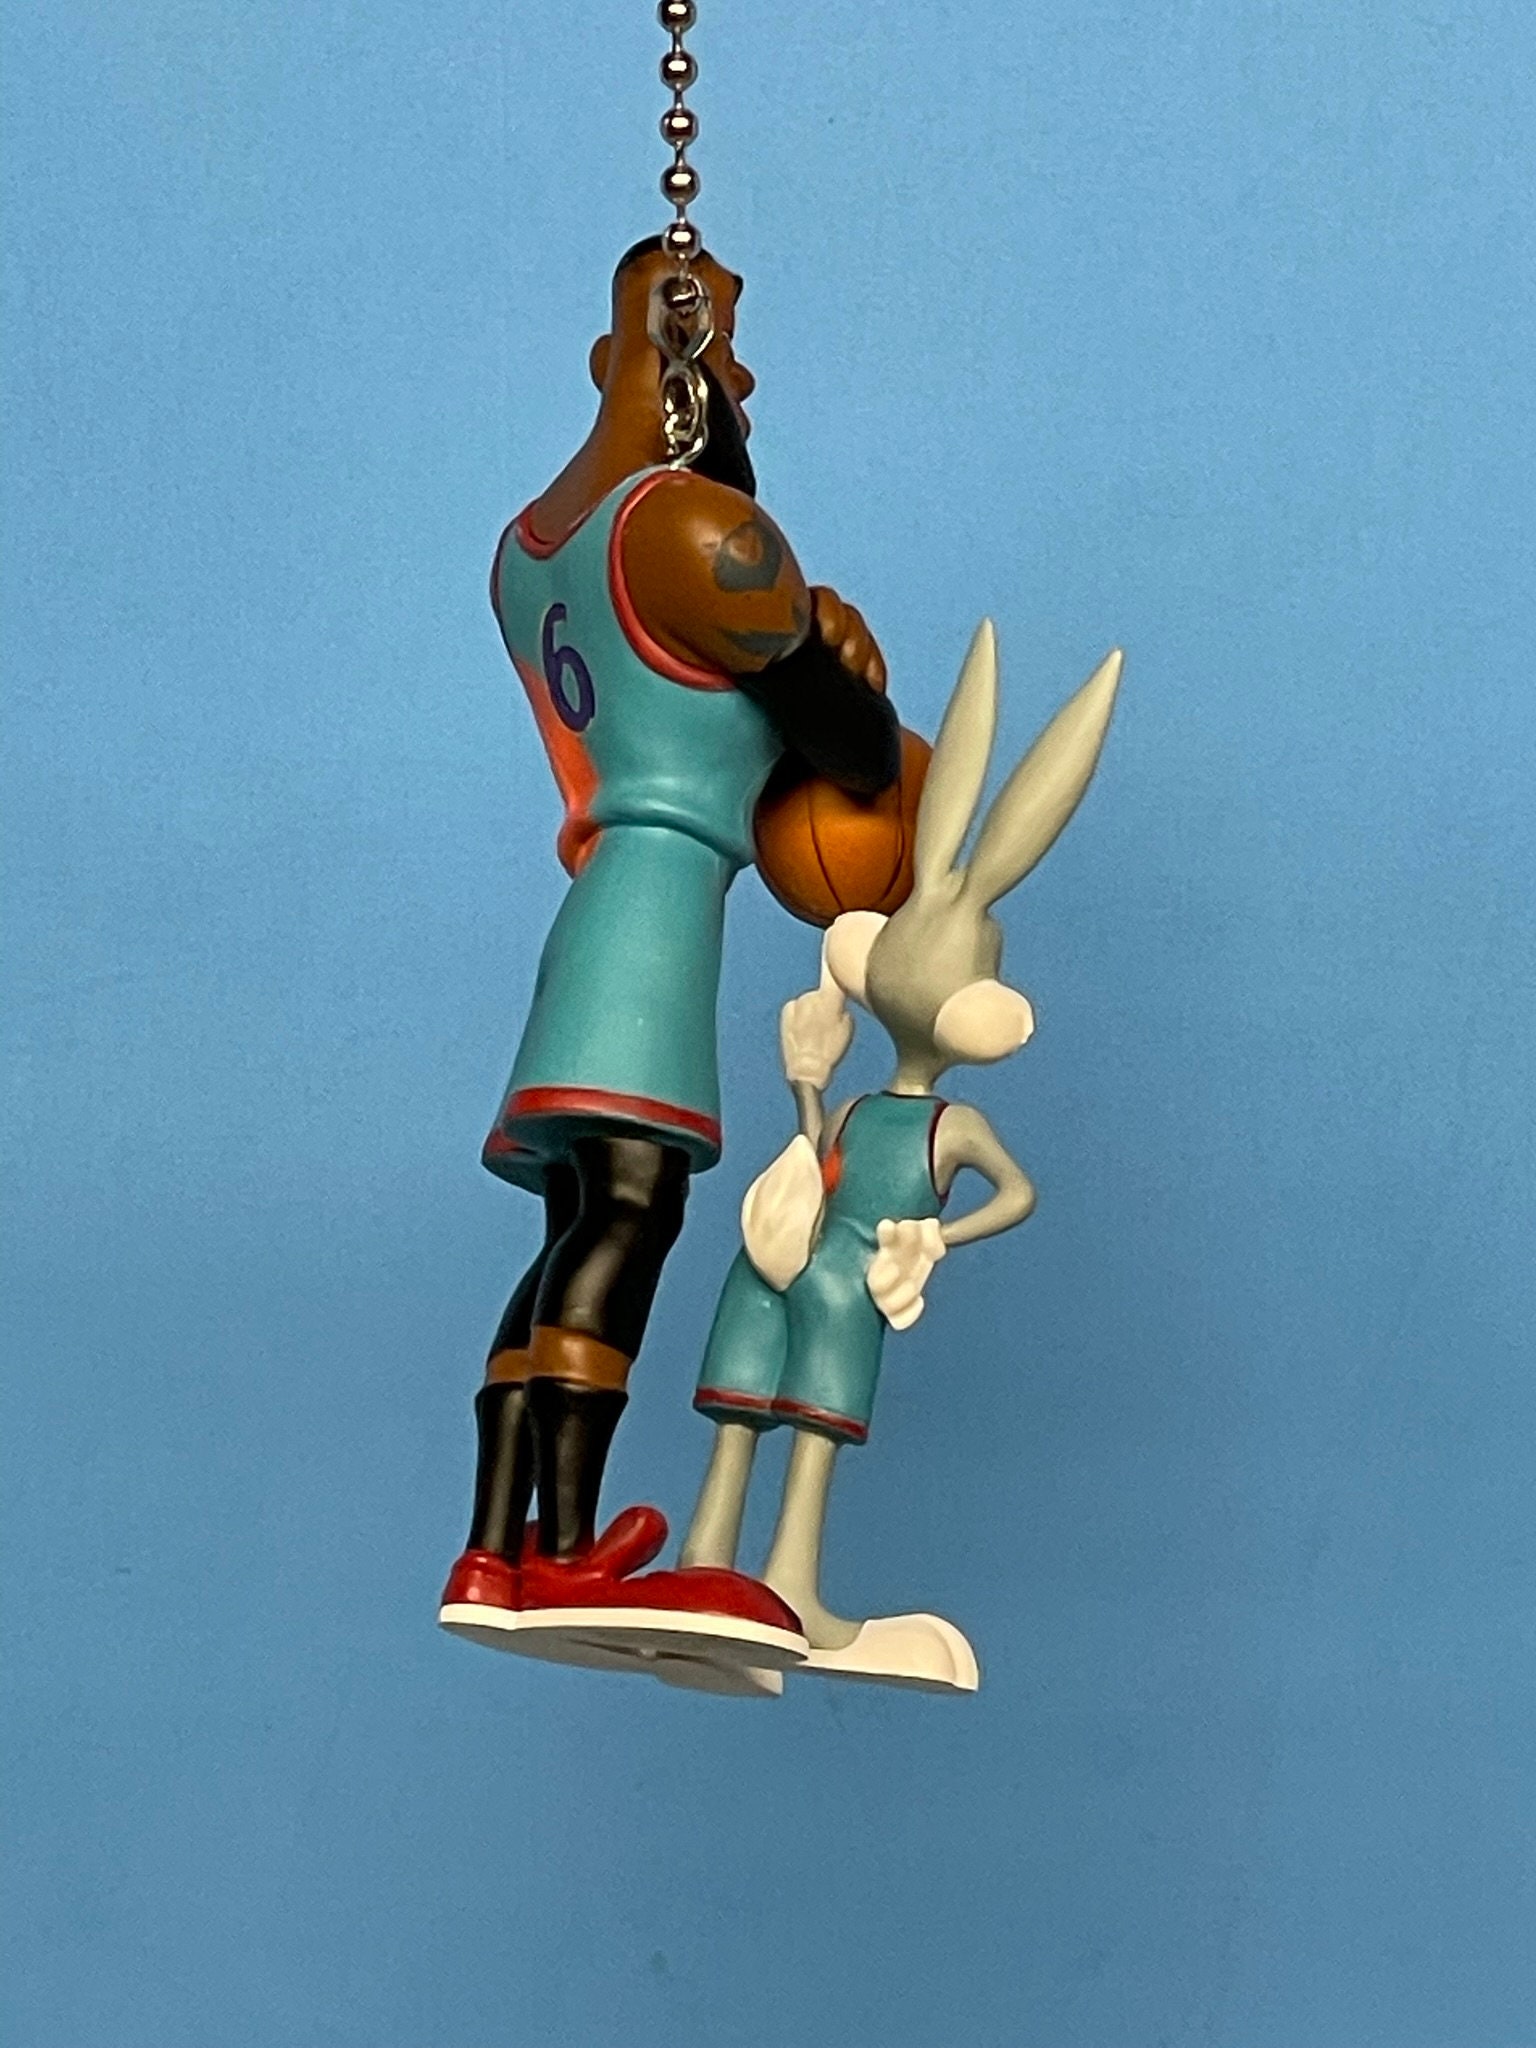 Bugs Bunny & Lebron James Space Jam Tune Squad Ceiling 